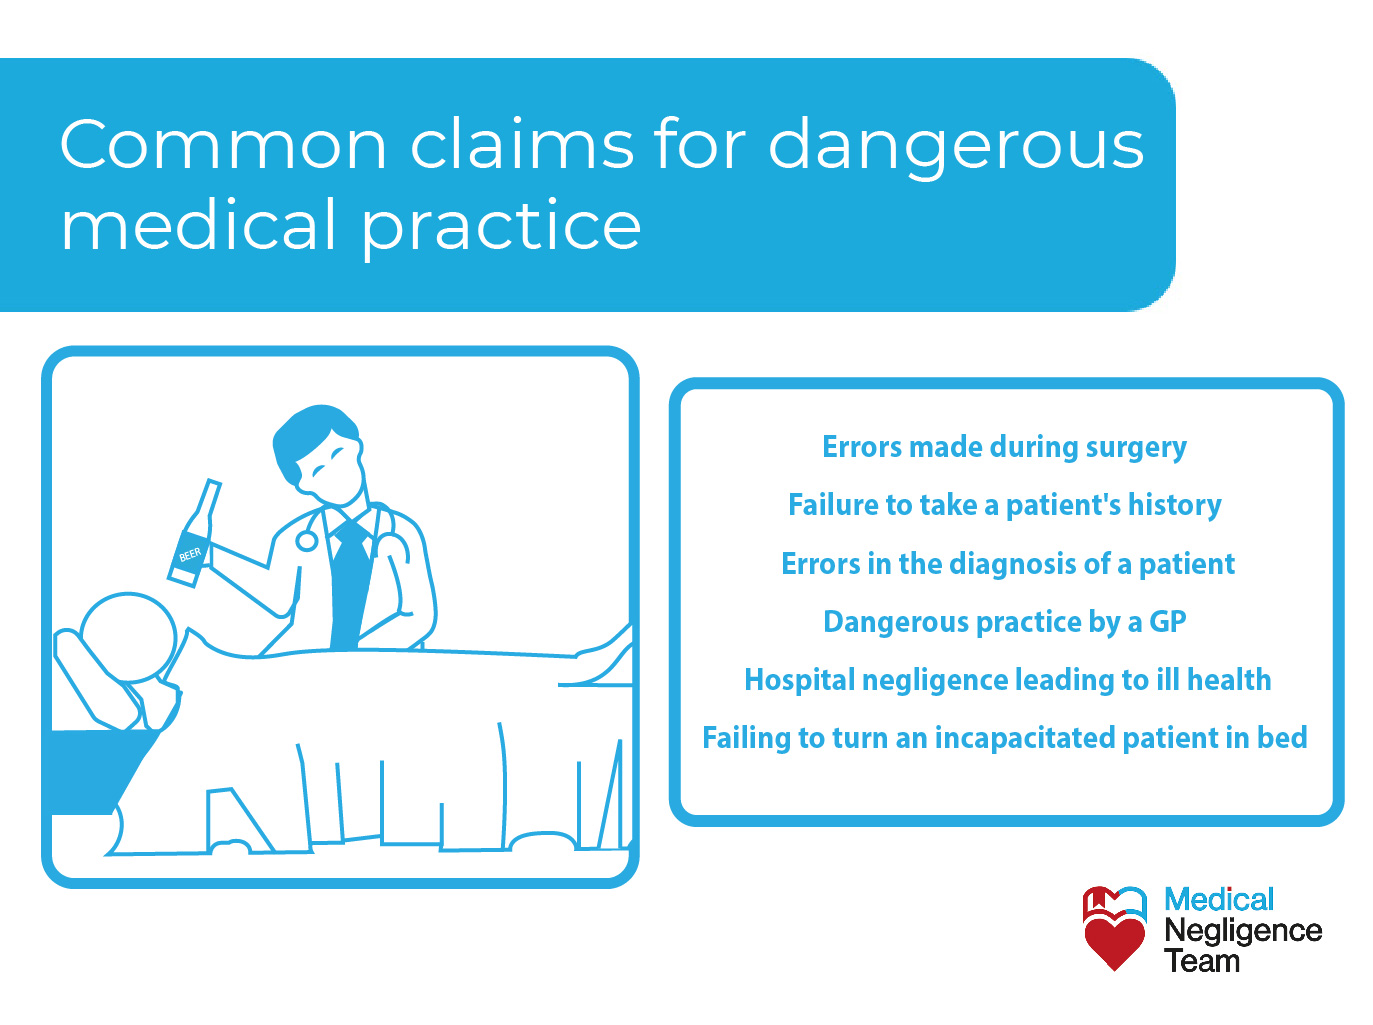 Common claims for dangerous practice